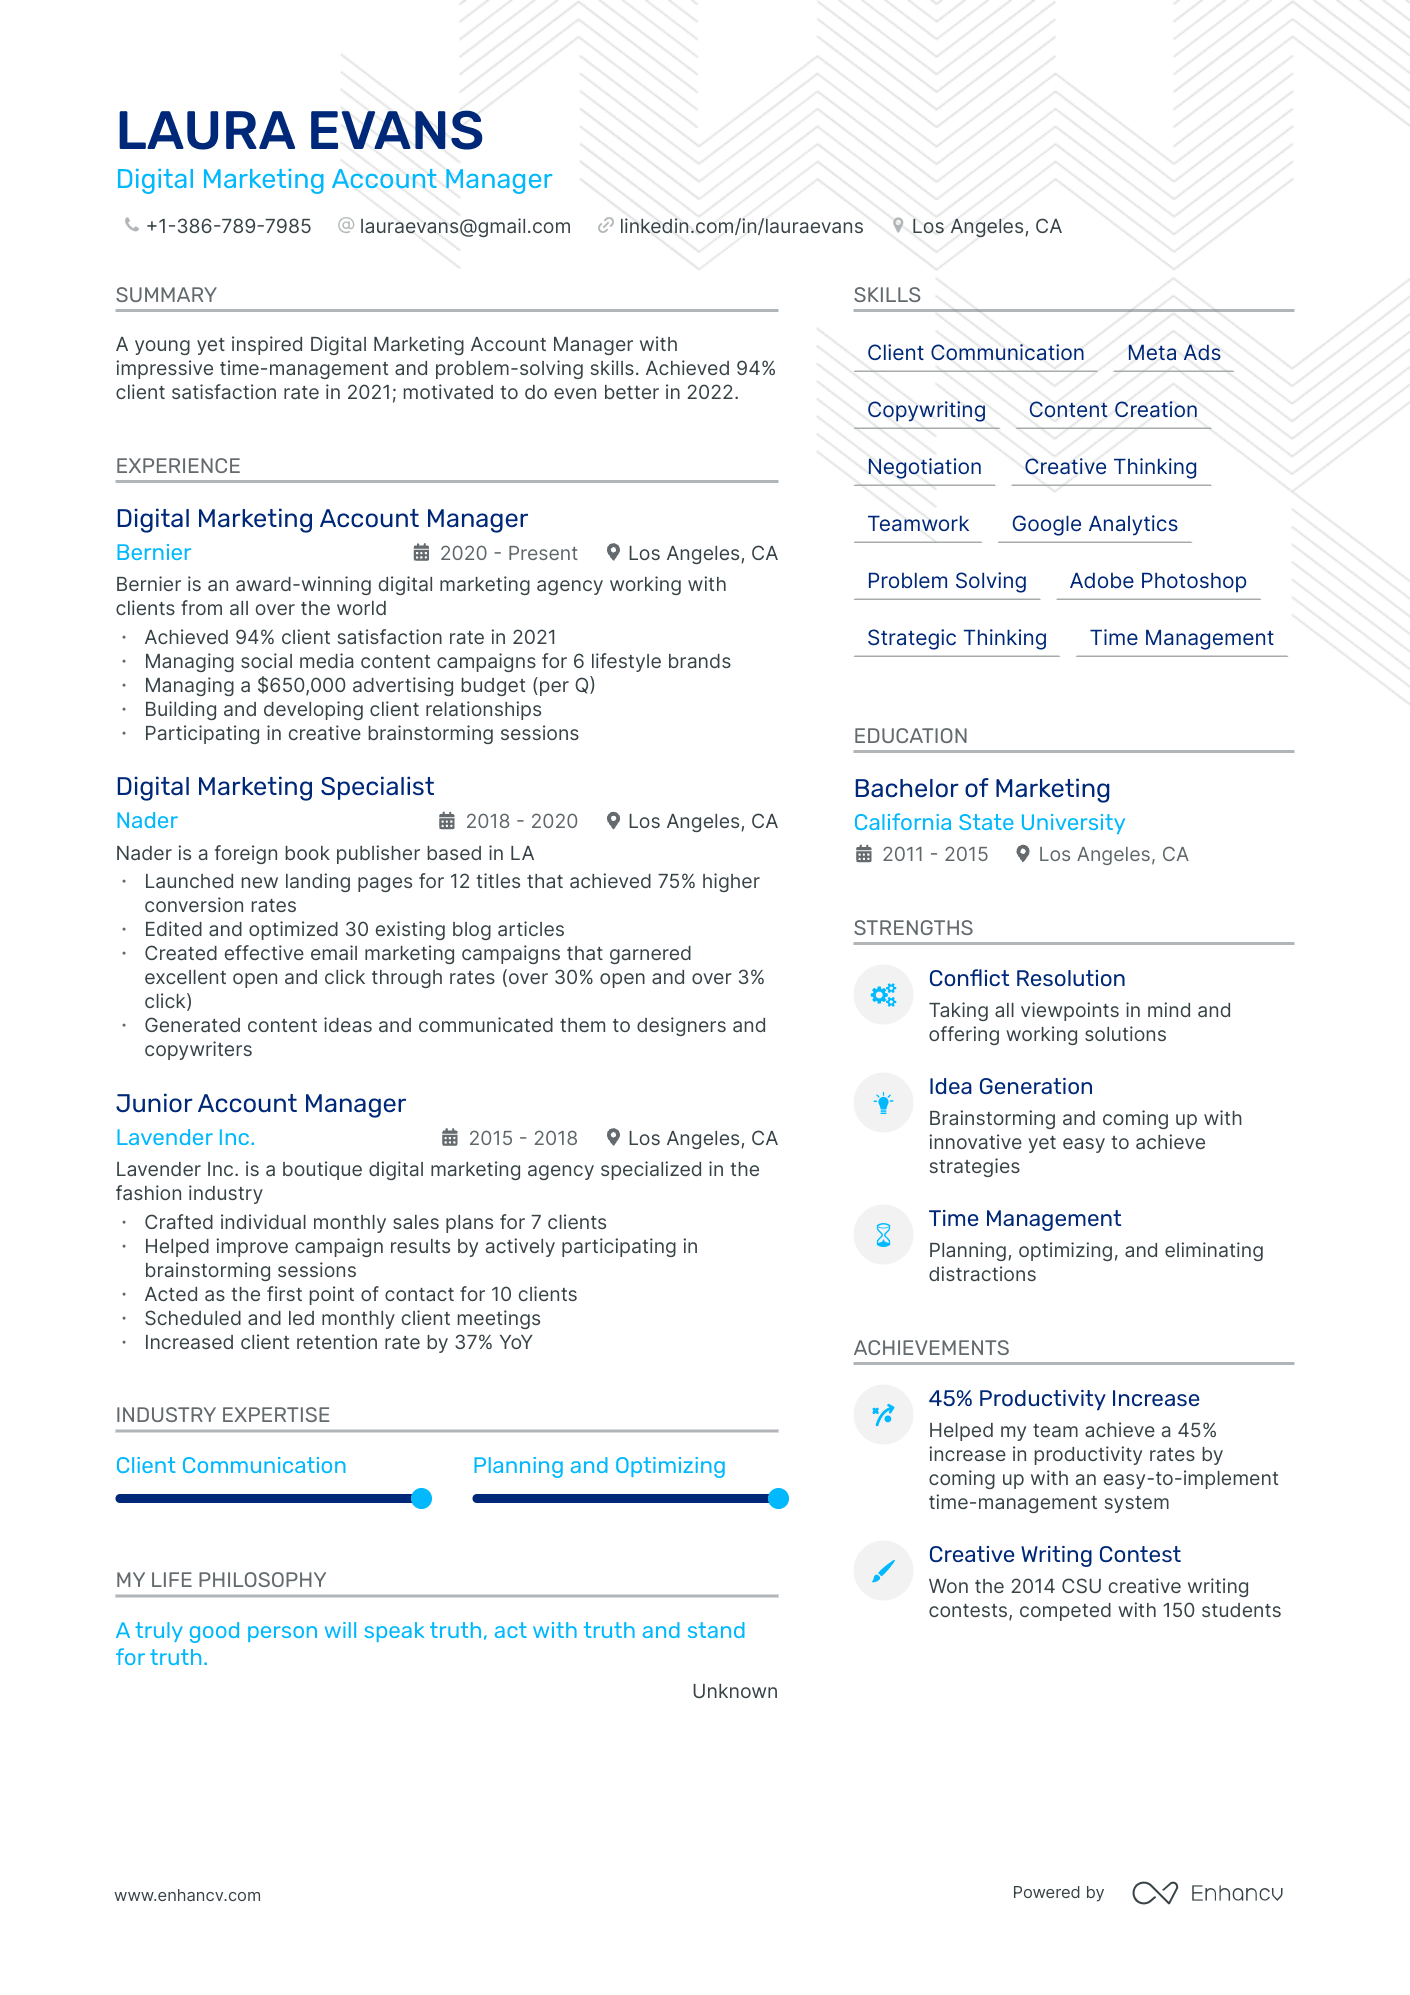 Digital Marketing Account Manager resume example